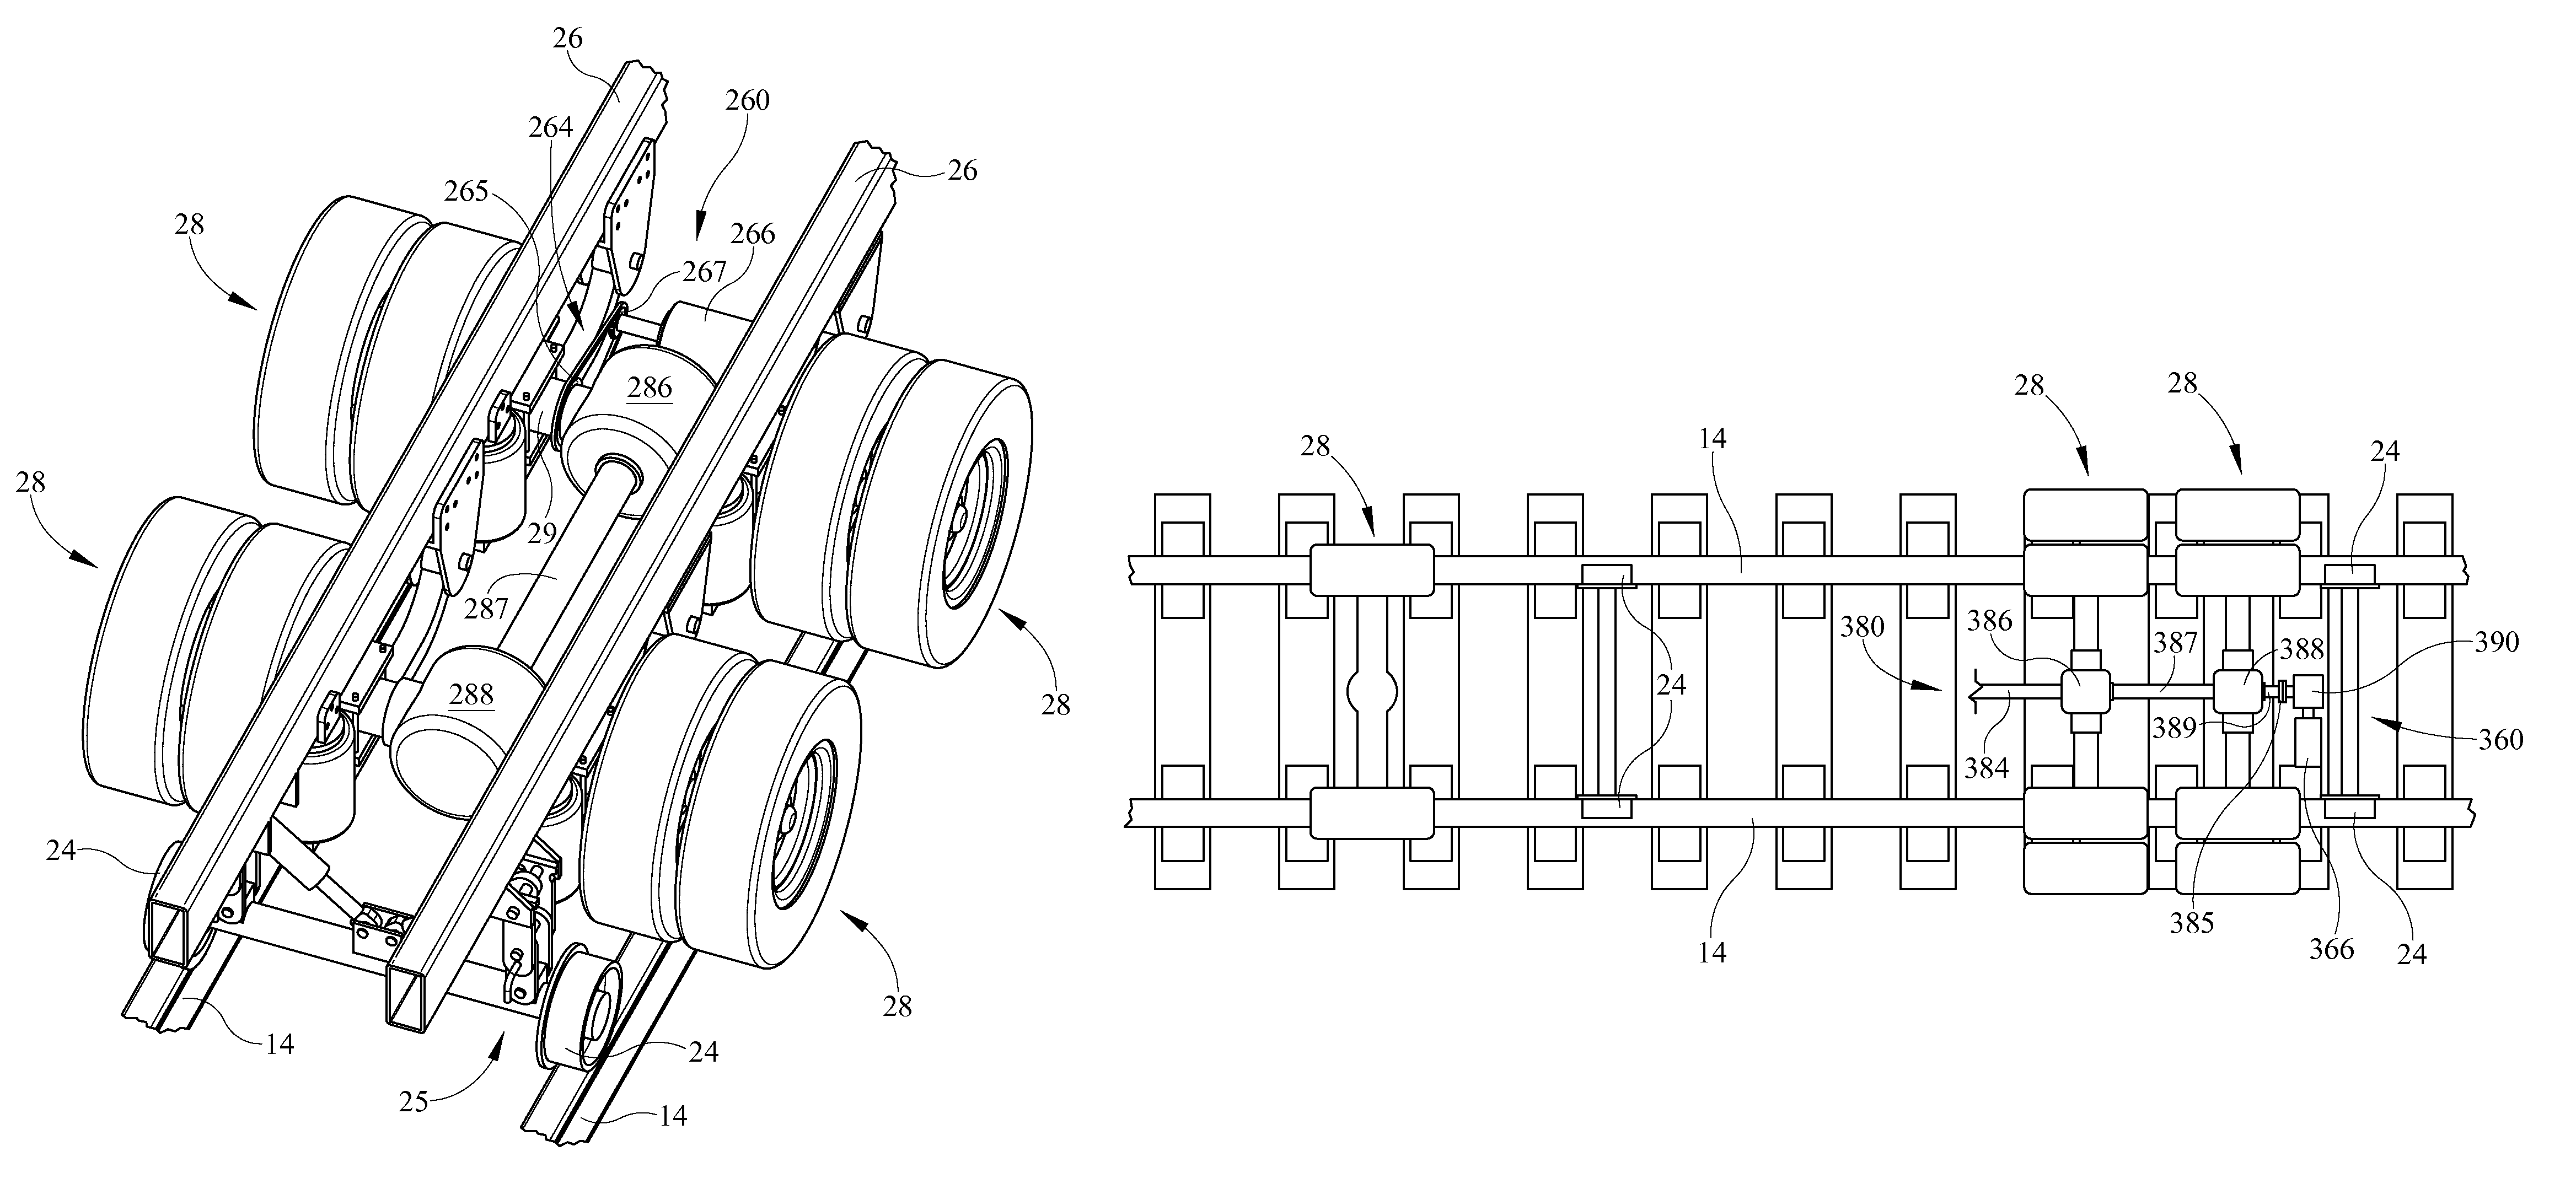 Auxiliary drive system for a high-rail vehicle